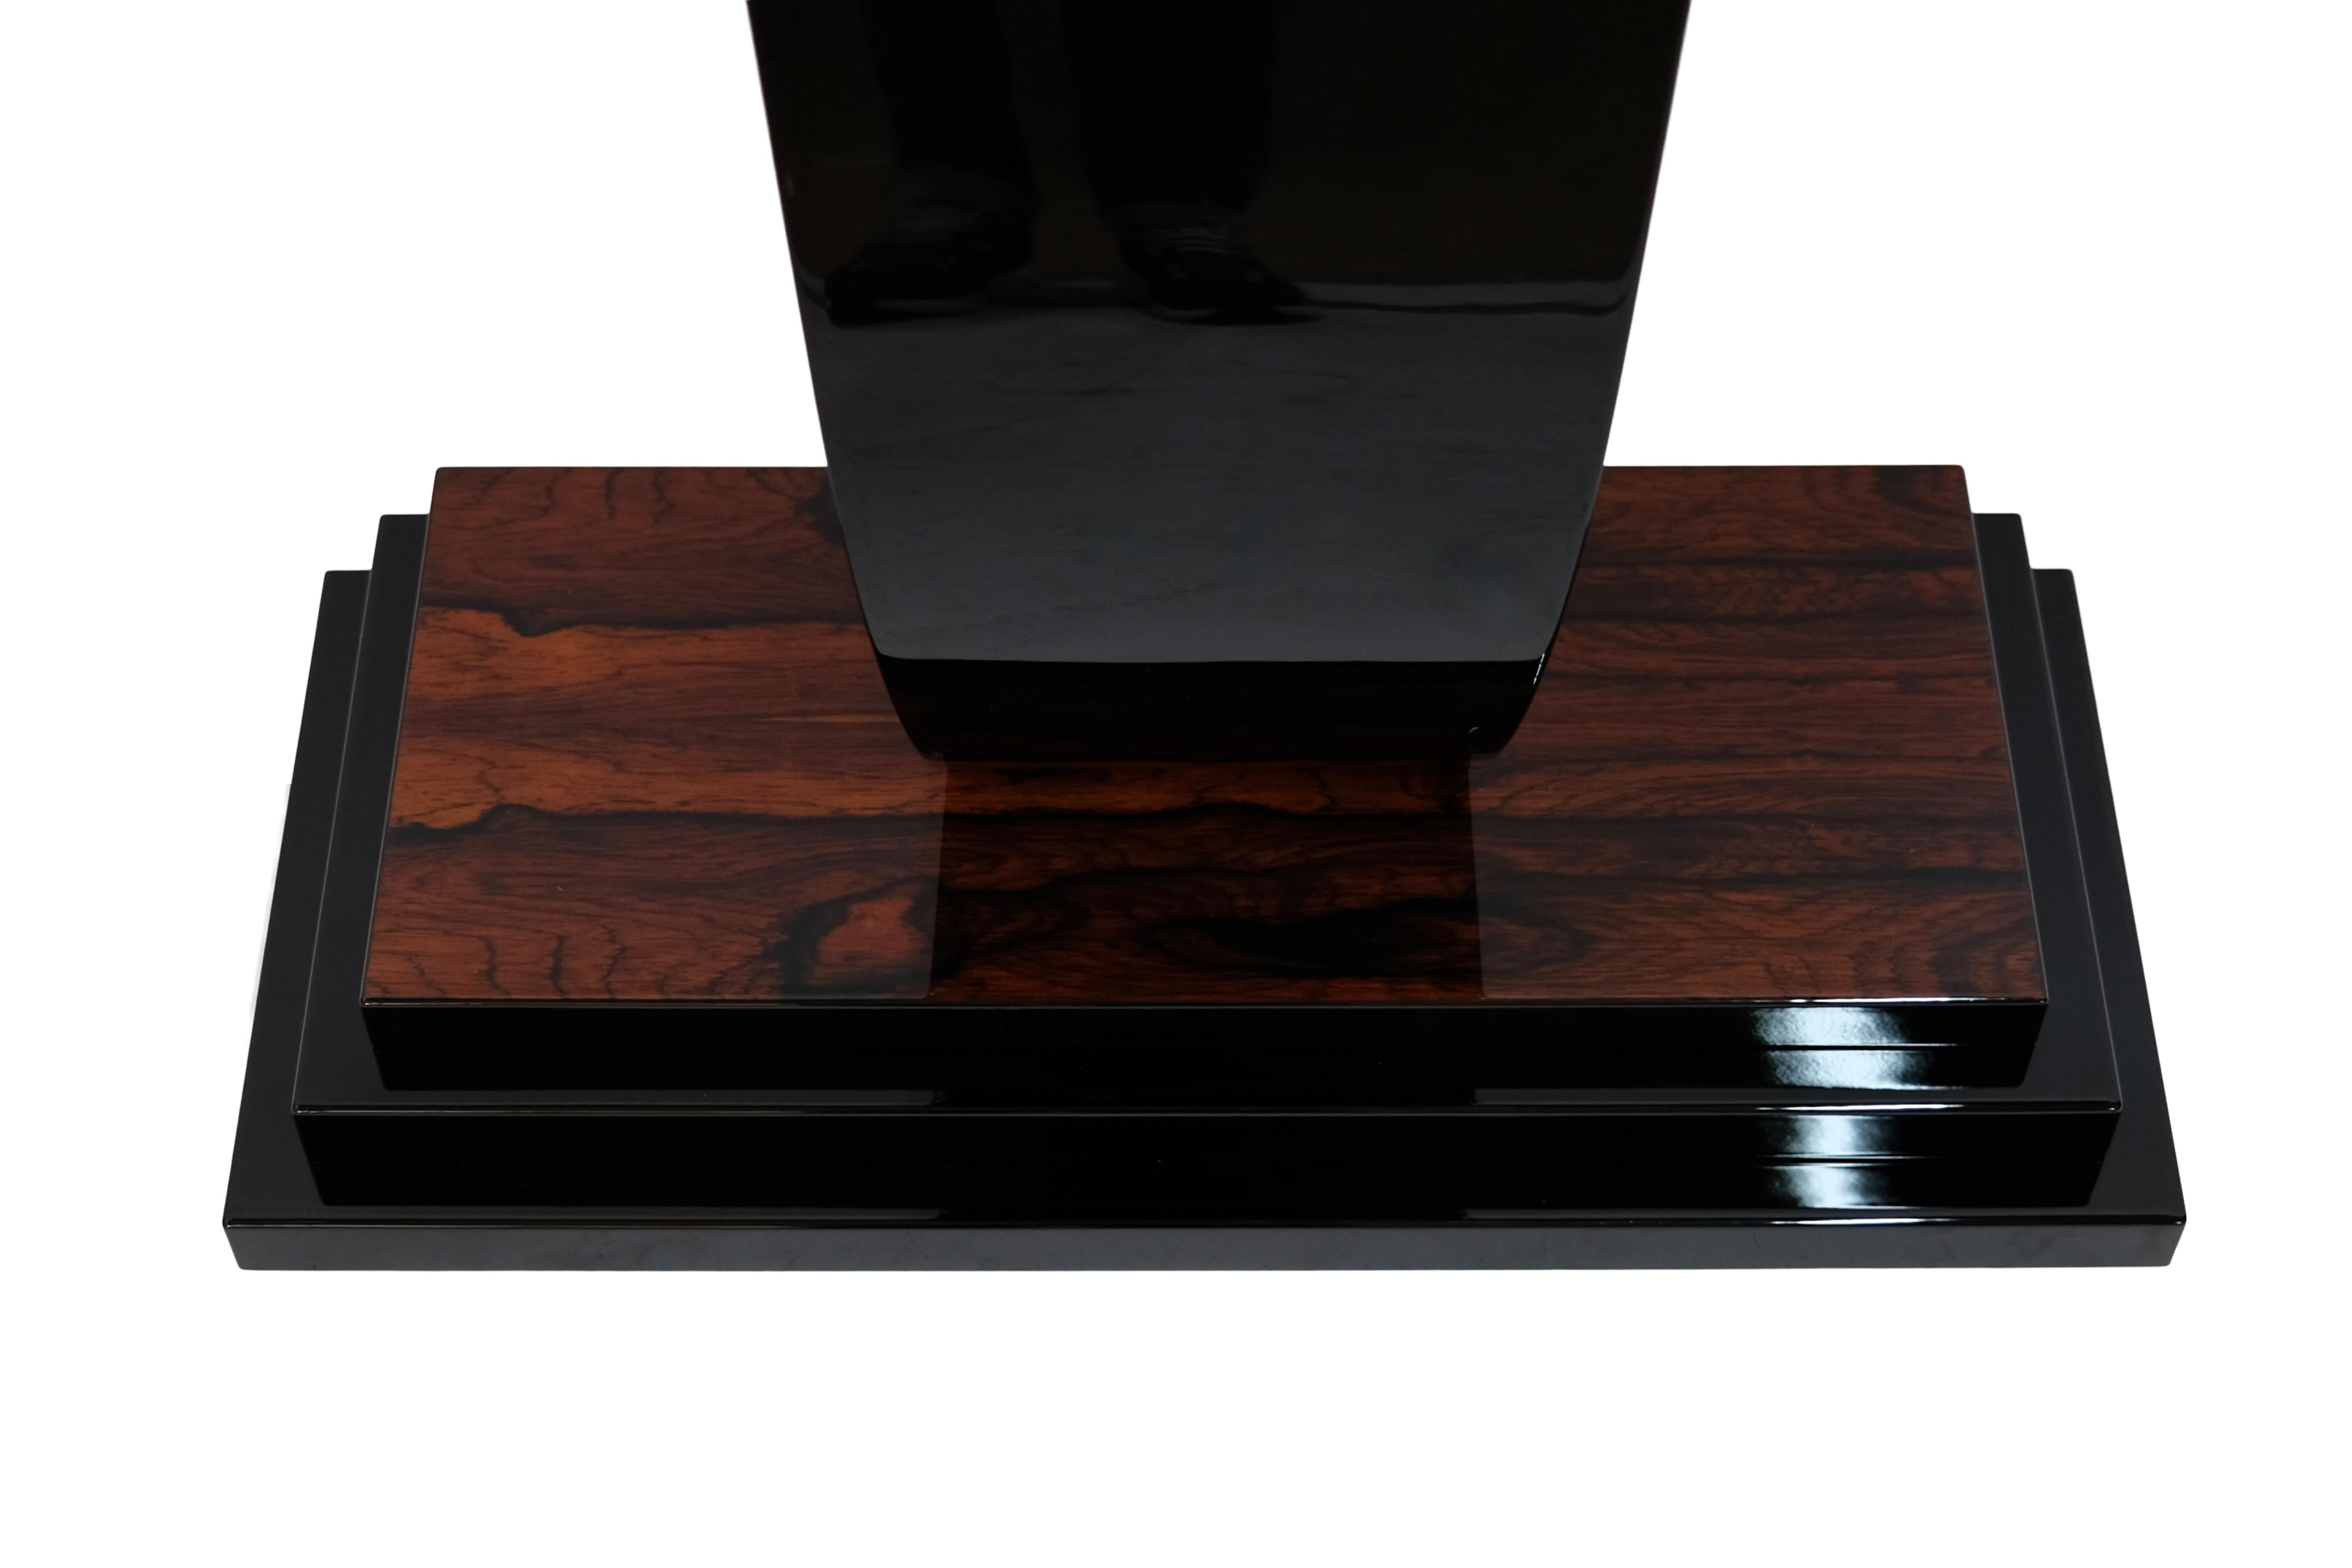 Lacquered Art Deco Style Console Table in Black Piano Lacquer and Real Wood Veneer